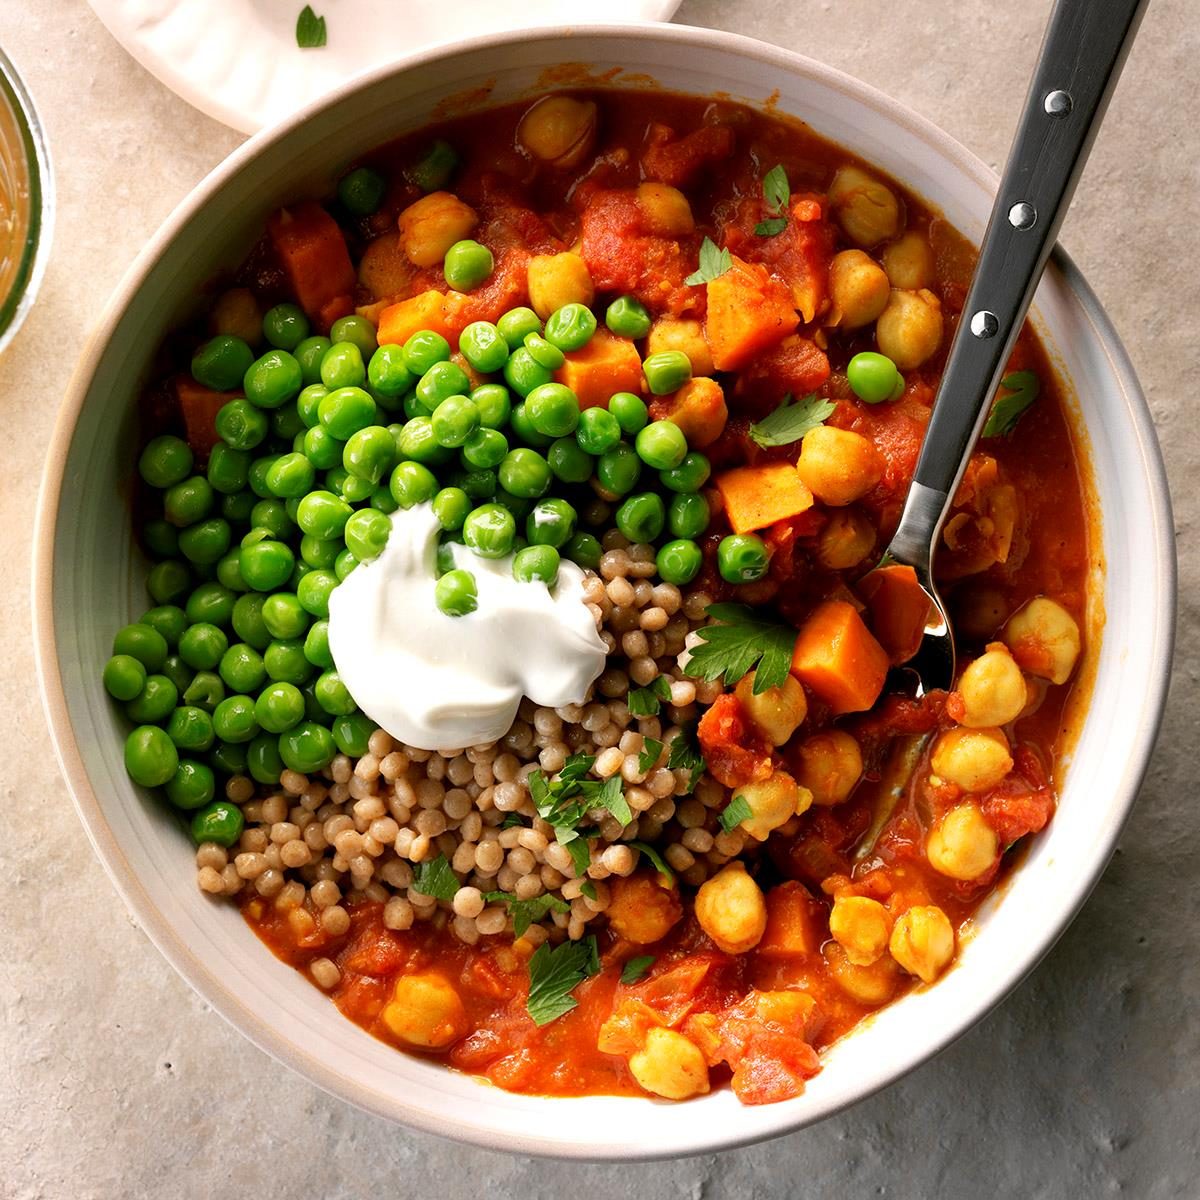 Day 18: Quickpea Curry